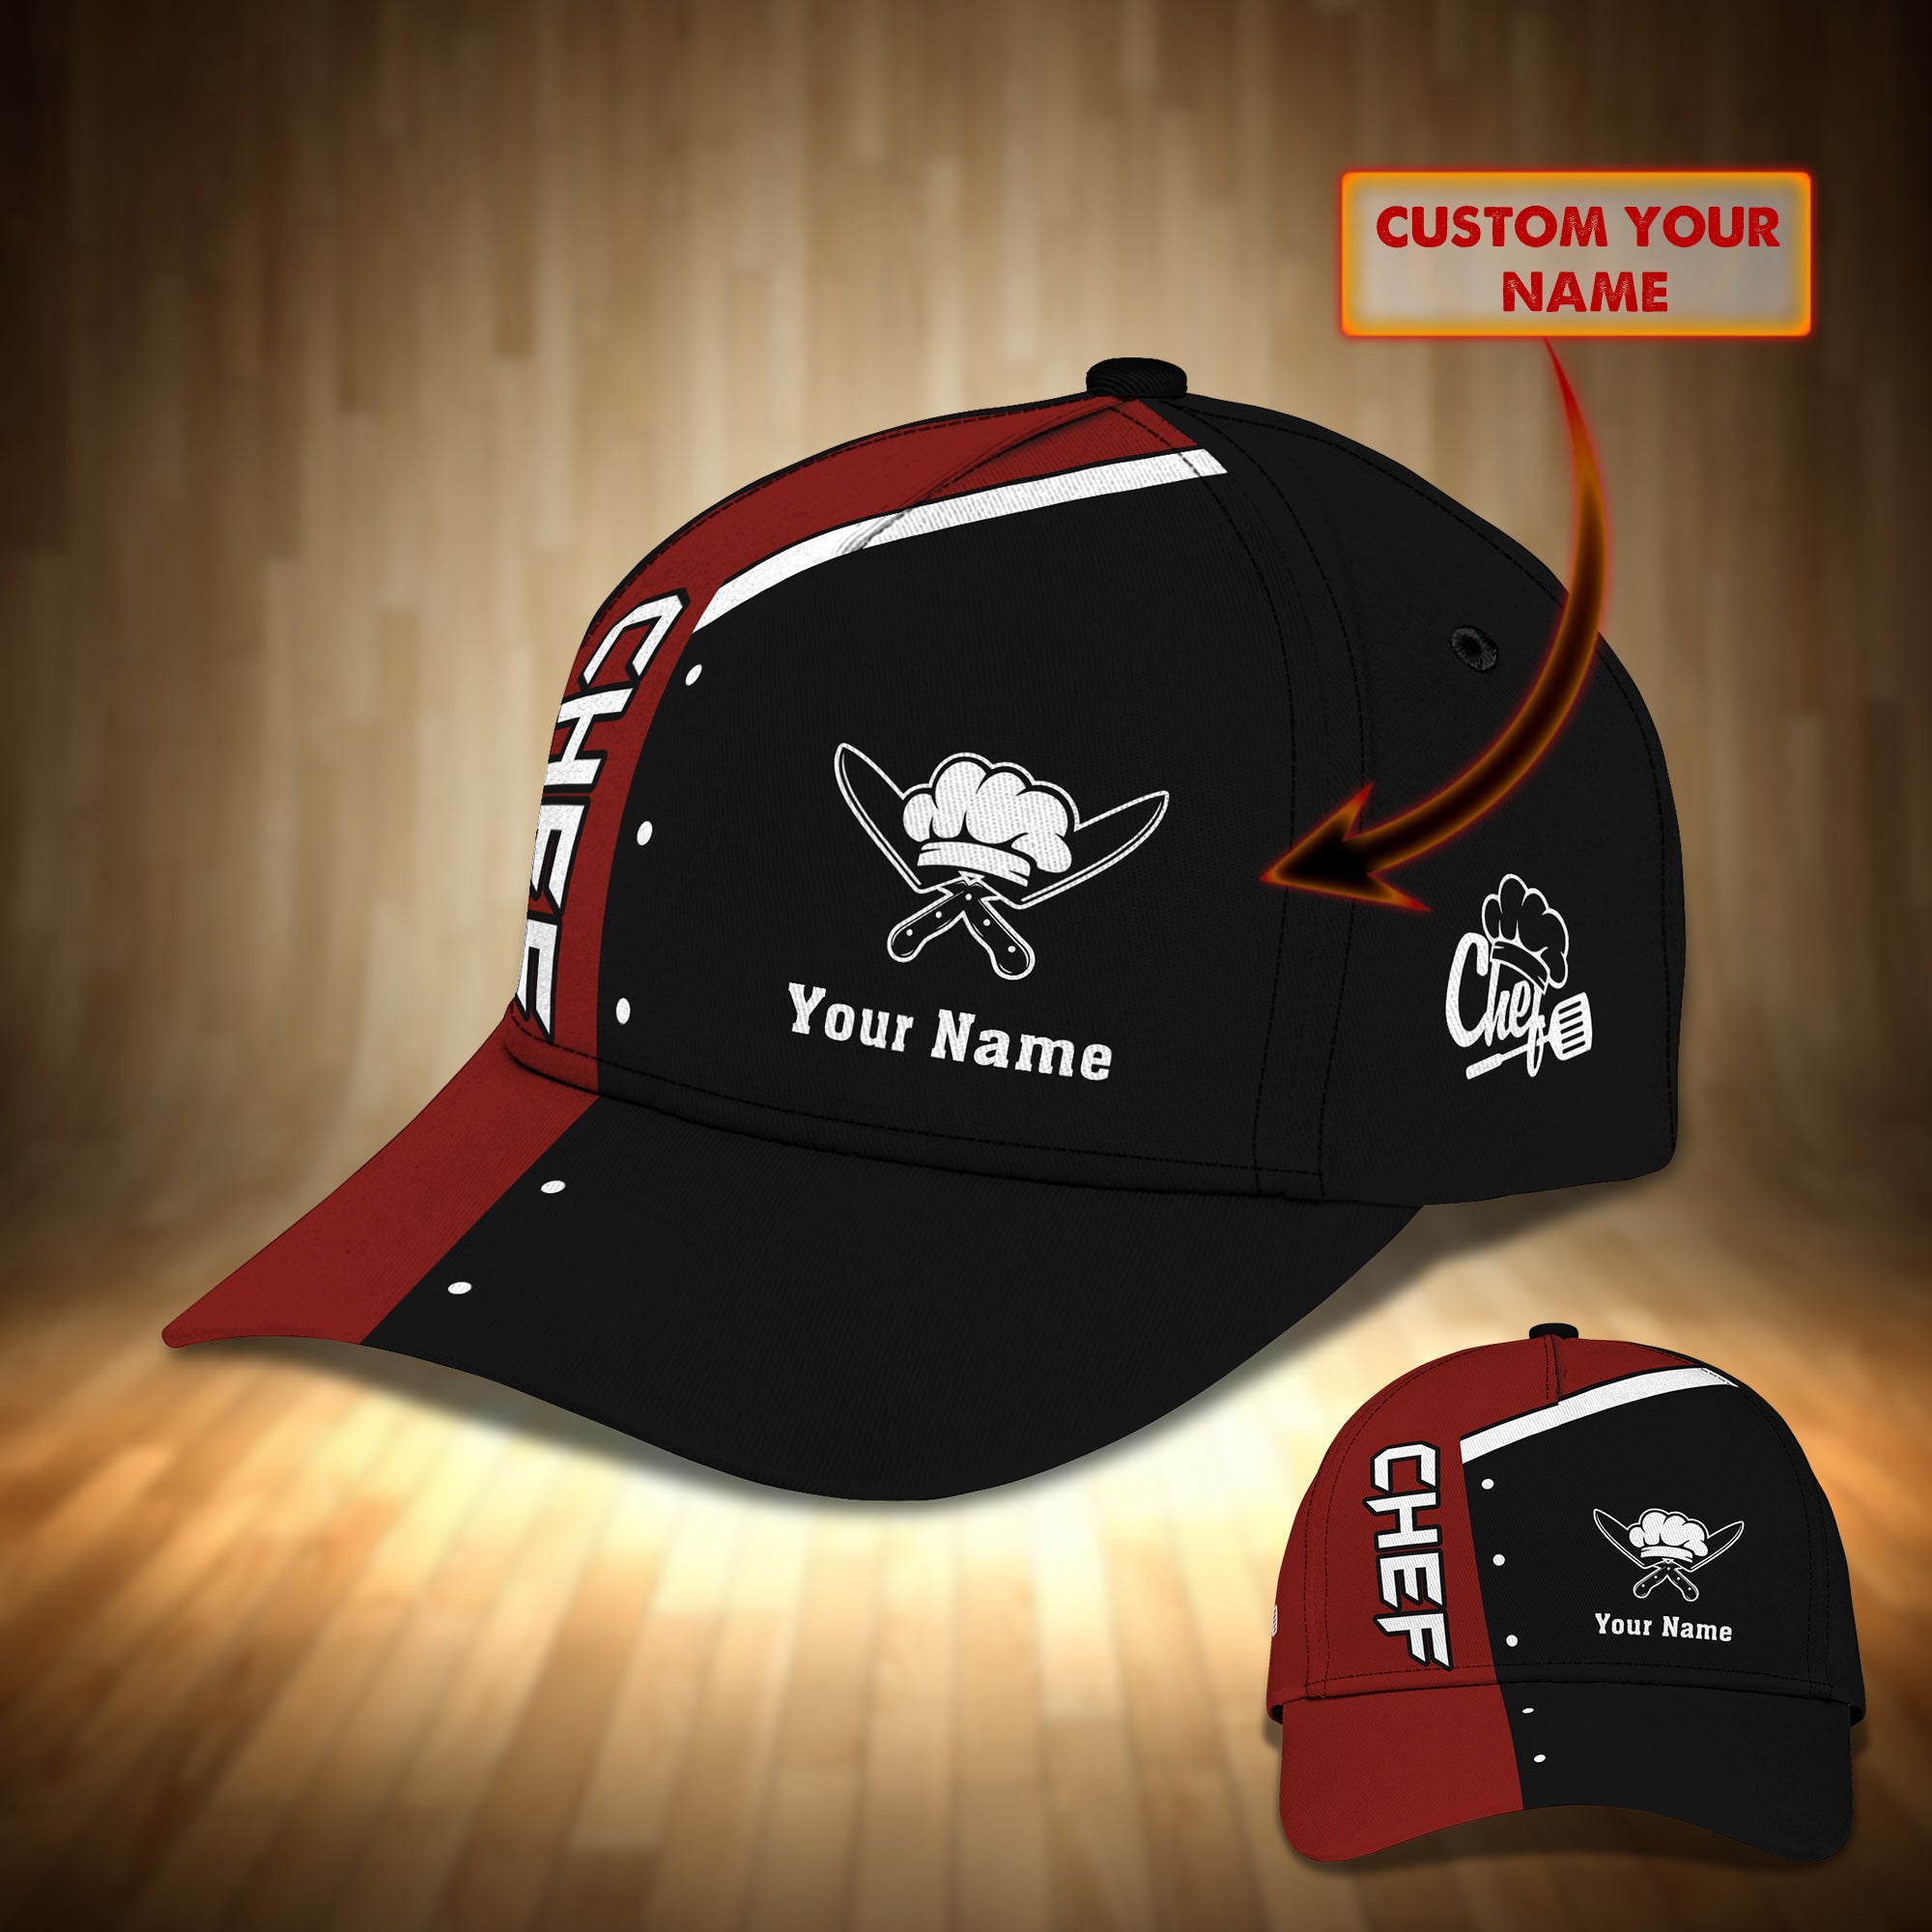 Chef Cook Personalized Name Cap 18 RinC98 Black & Red